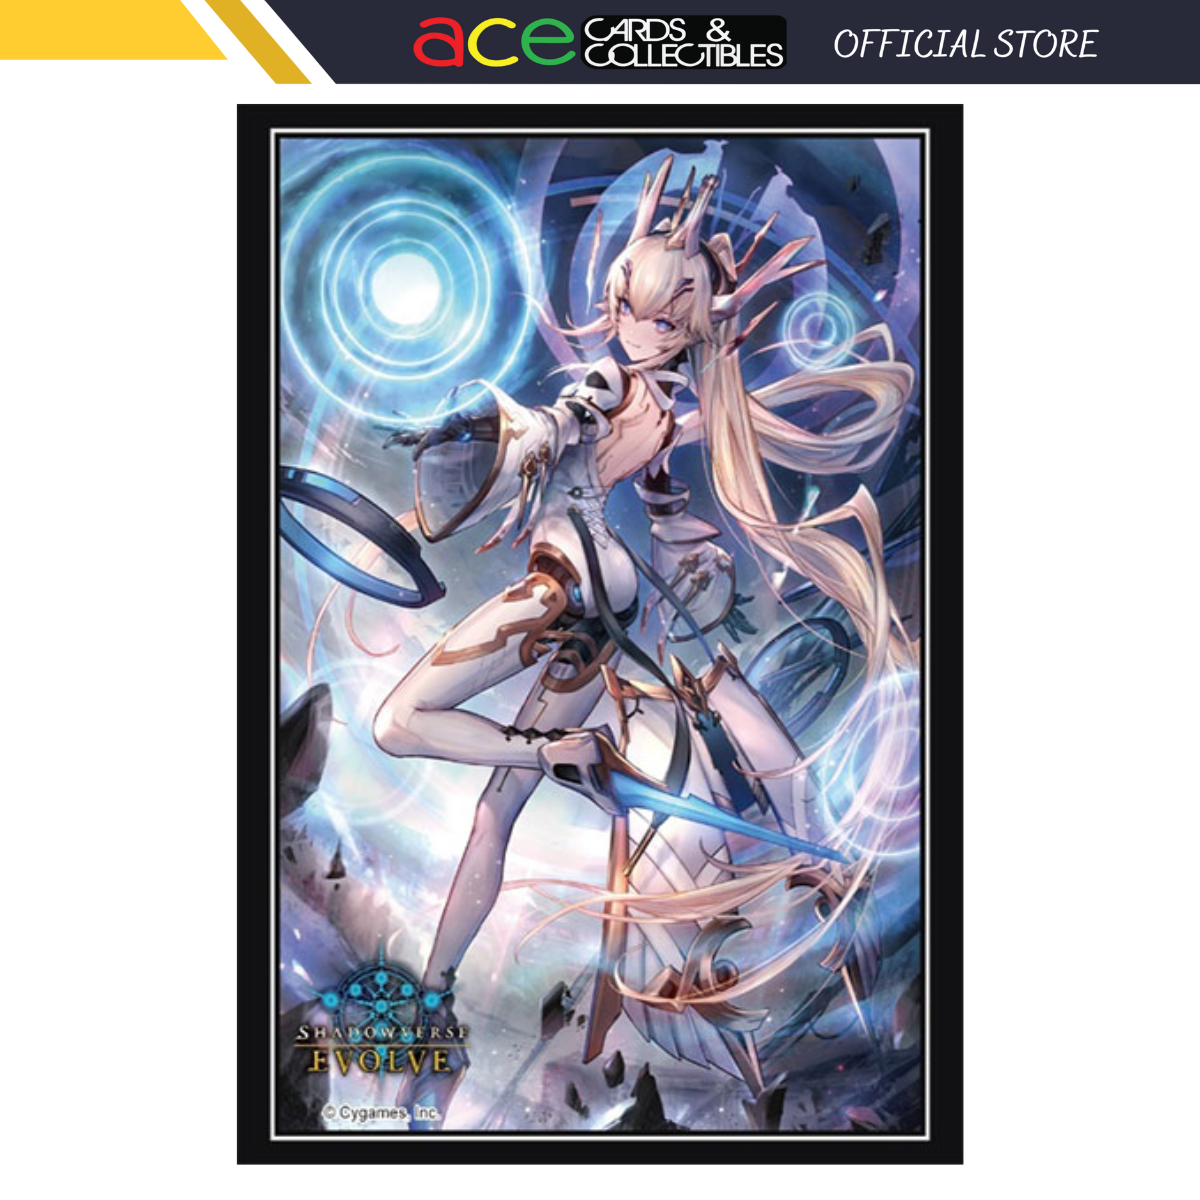 Shadowverse Evolve Official Sleeve “Technolord" (Vol.108)-Shadowverse-Ace Cards & Collectibles